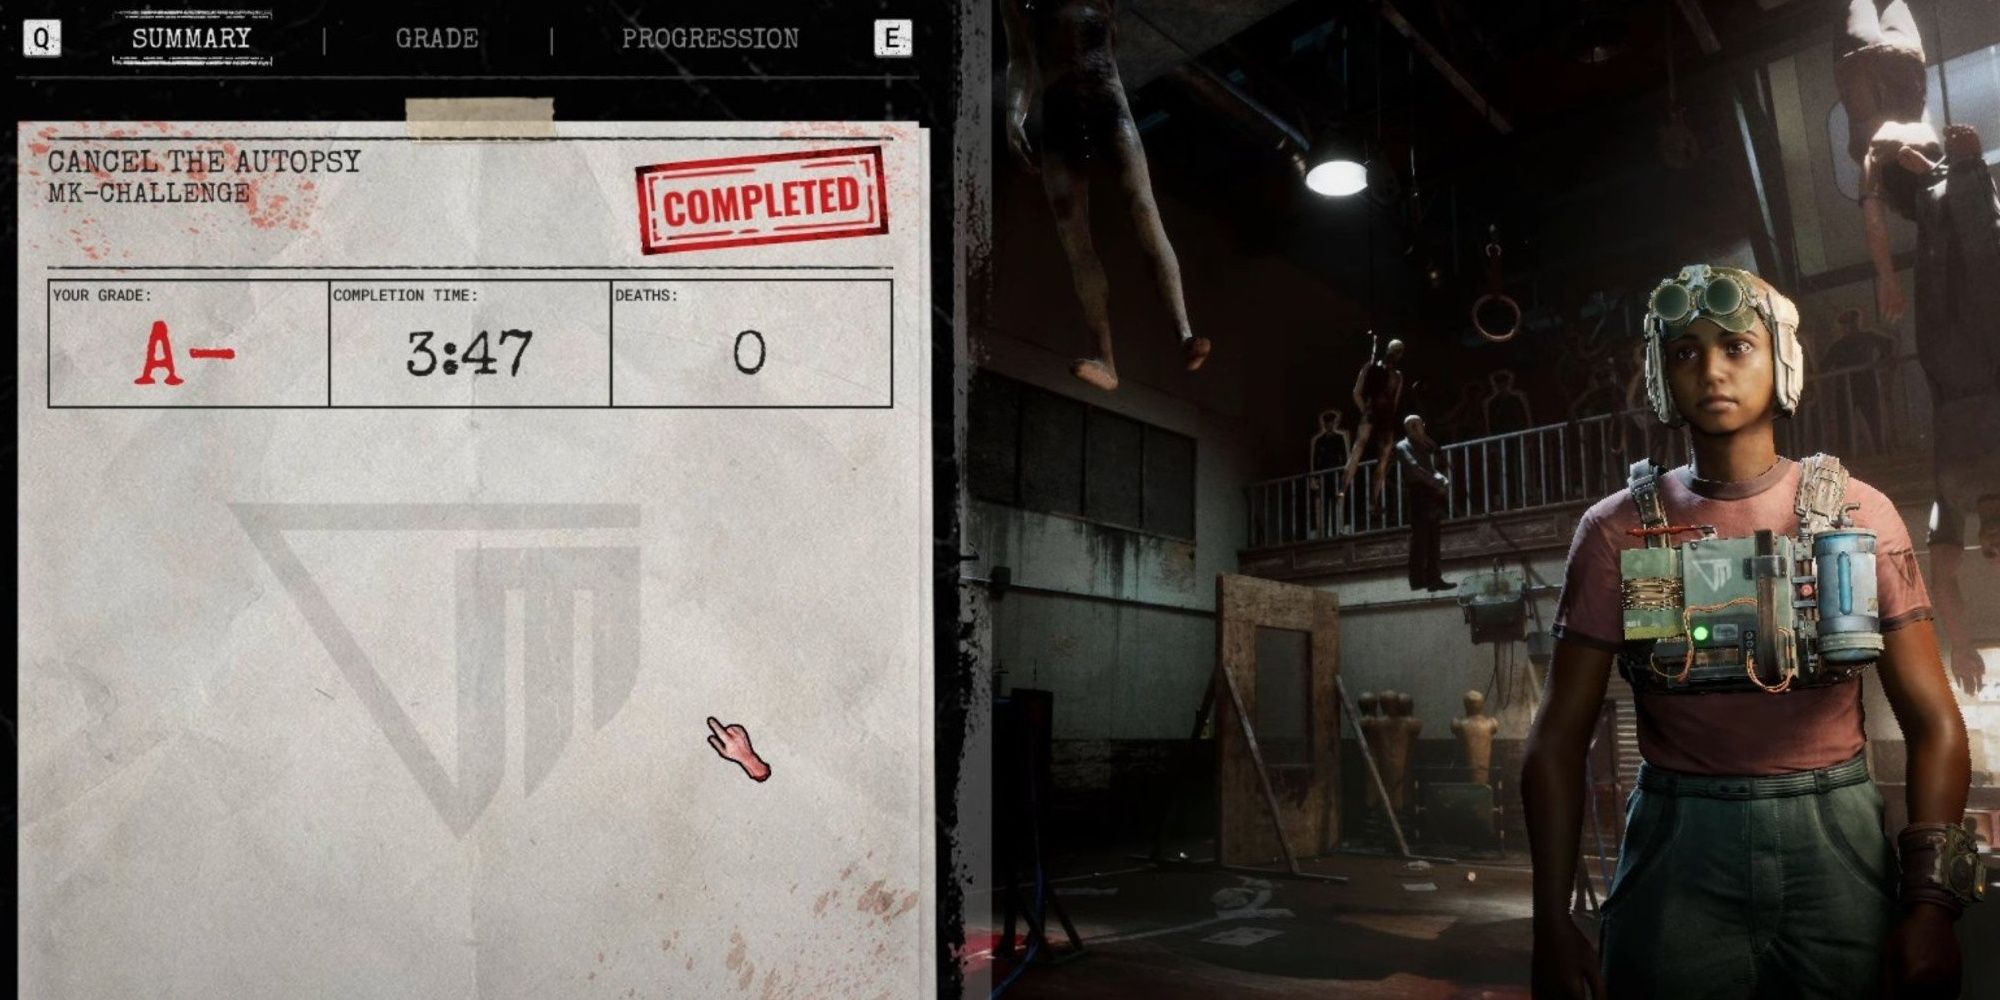 The Outlast Trials How Long to Beat? A Detailed Look at Game Length - News